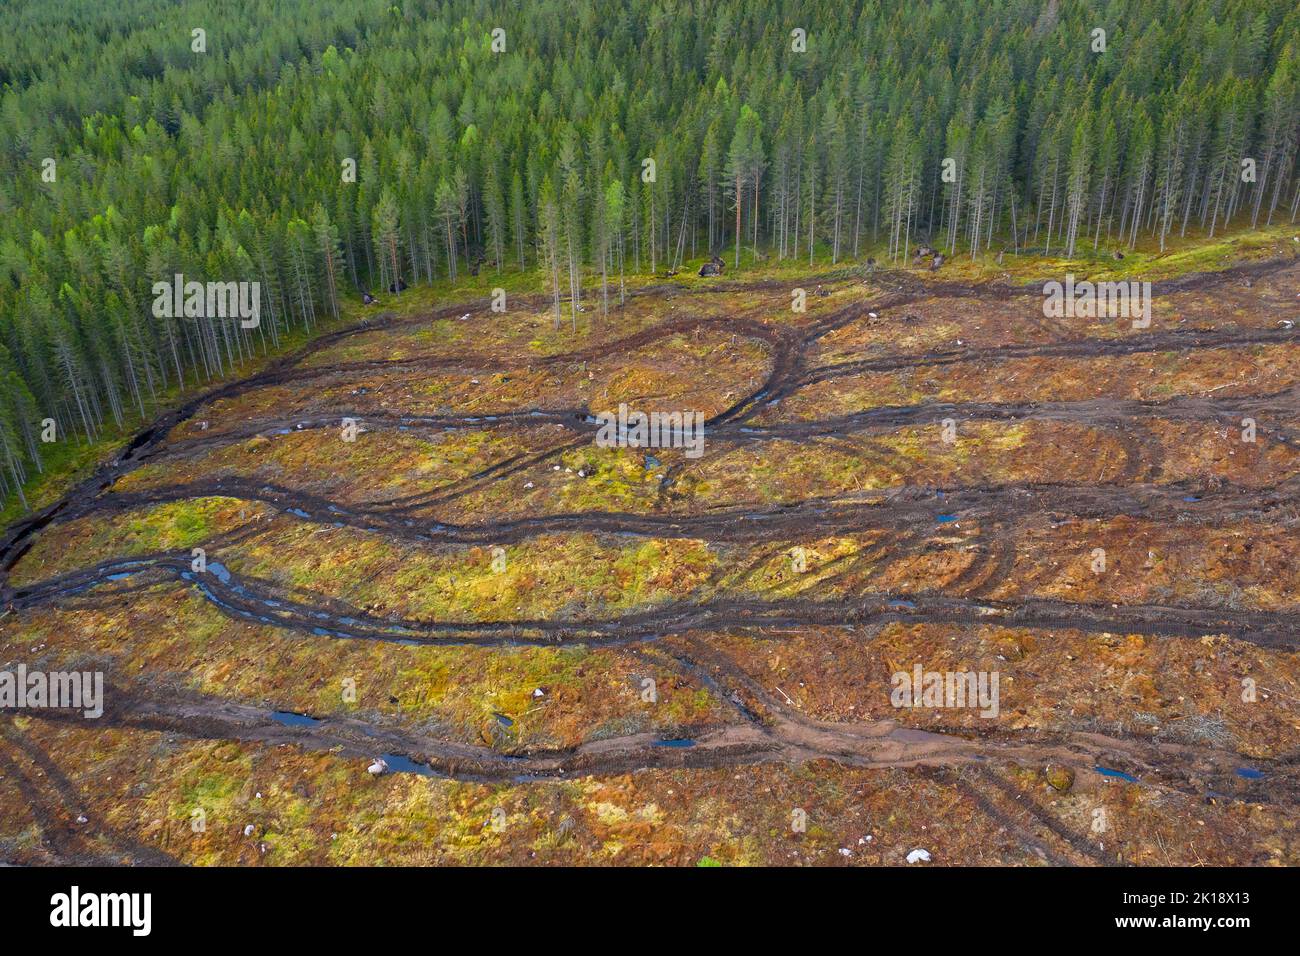 Aerial view over clearcut showing tracks of harvesters, clearcutting / clearfelling is a forestry / logging practice in which all trees are cut down Stock Photo